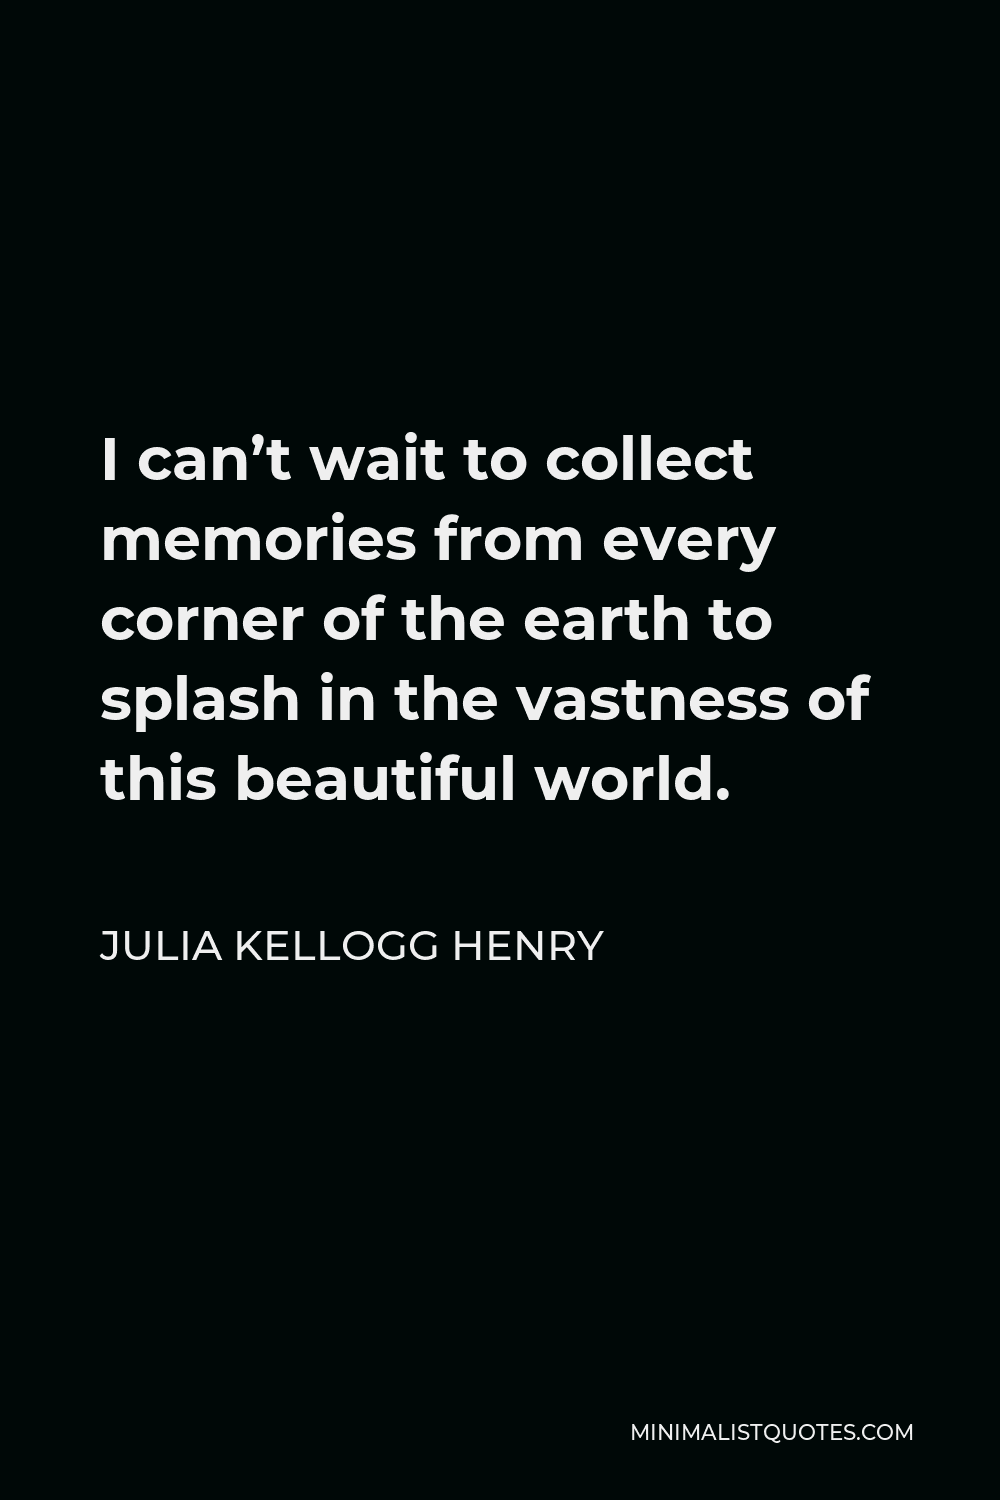 Julia Kellogg Henry Quote - I can’t wait to collect memories from every corner of the earth to splash in the vastness of this beautiful world.